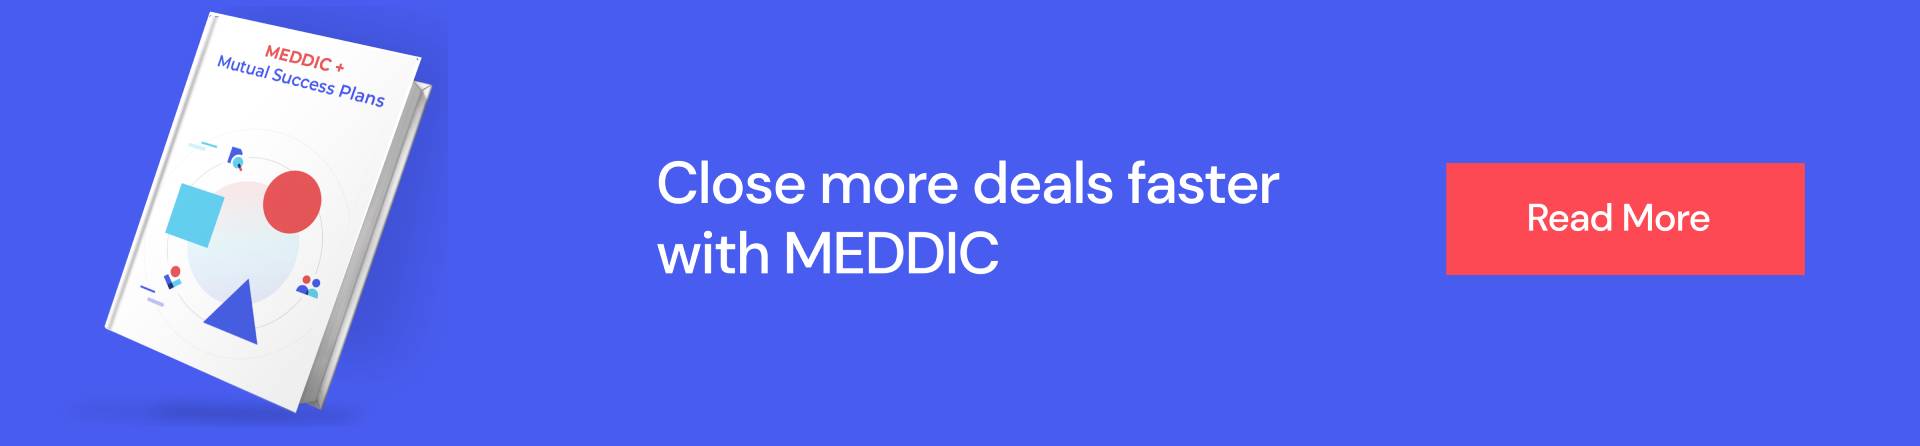 Close more deals faster with Meddic